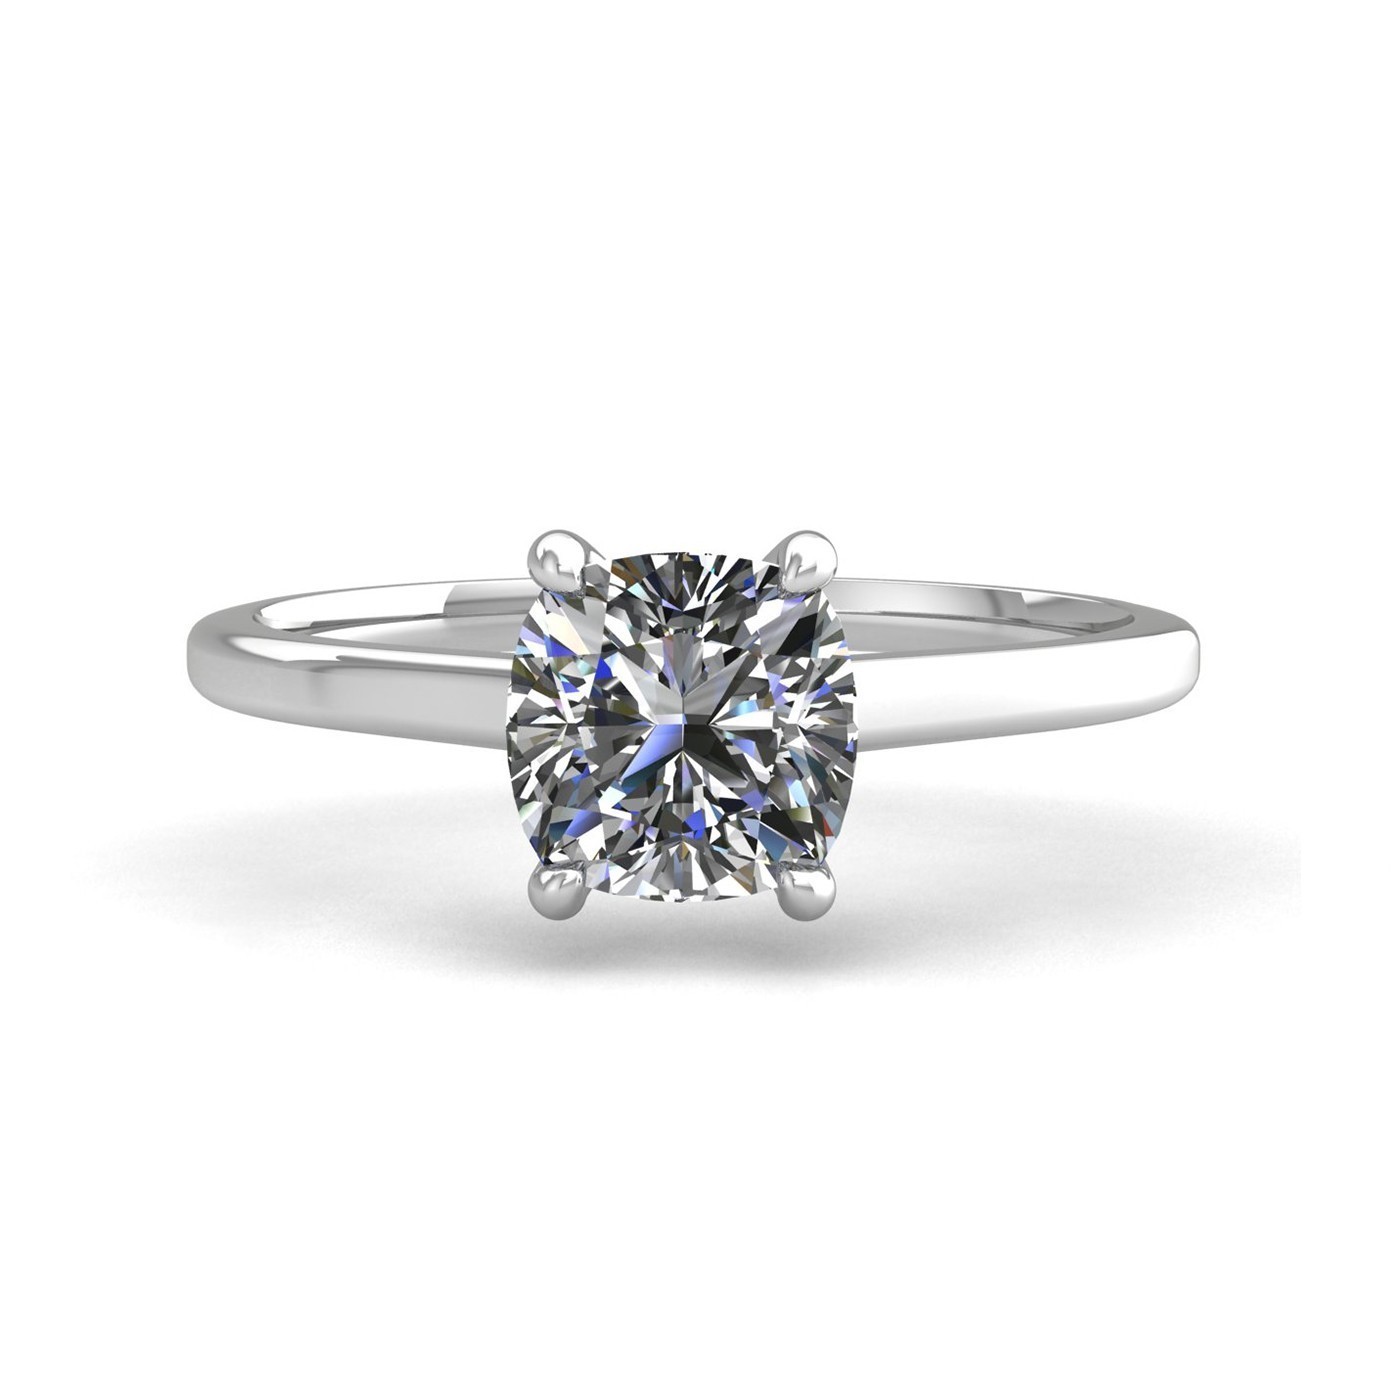 18K WHITE GOLD 4 PRONGS SOLITAIRE CUSHION CUT DIAMOND ENGAGEMENT RING WITH WHISPER THIN BAND